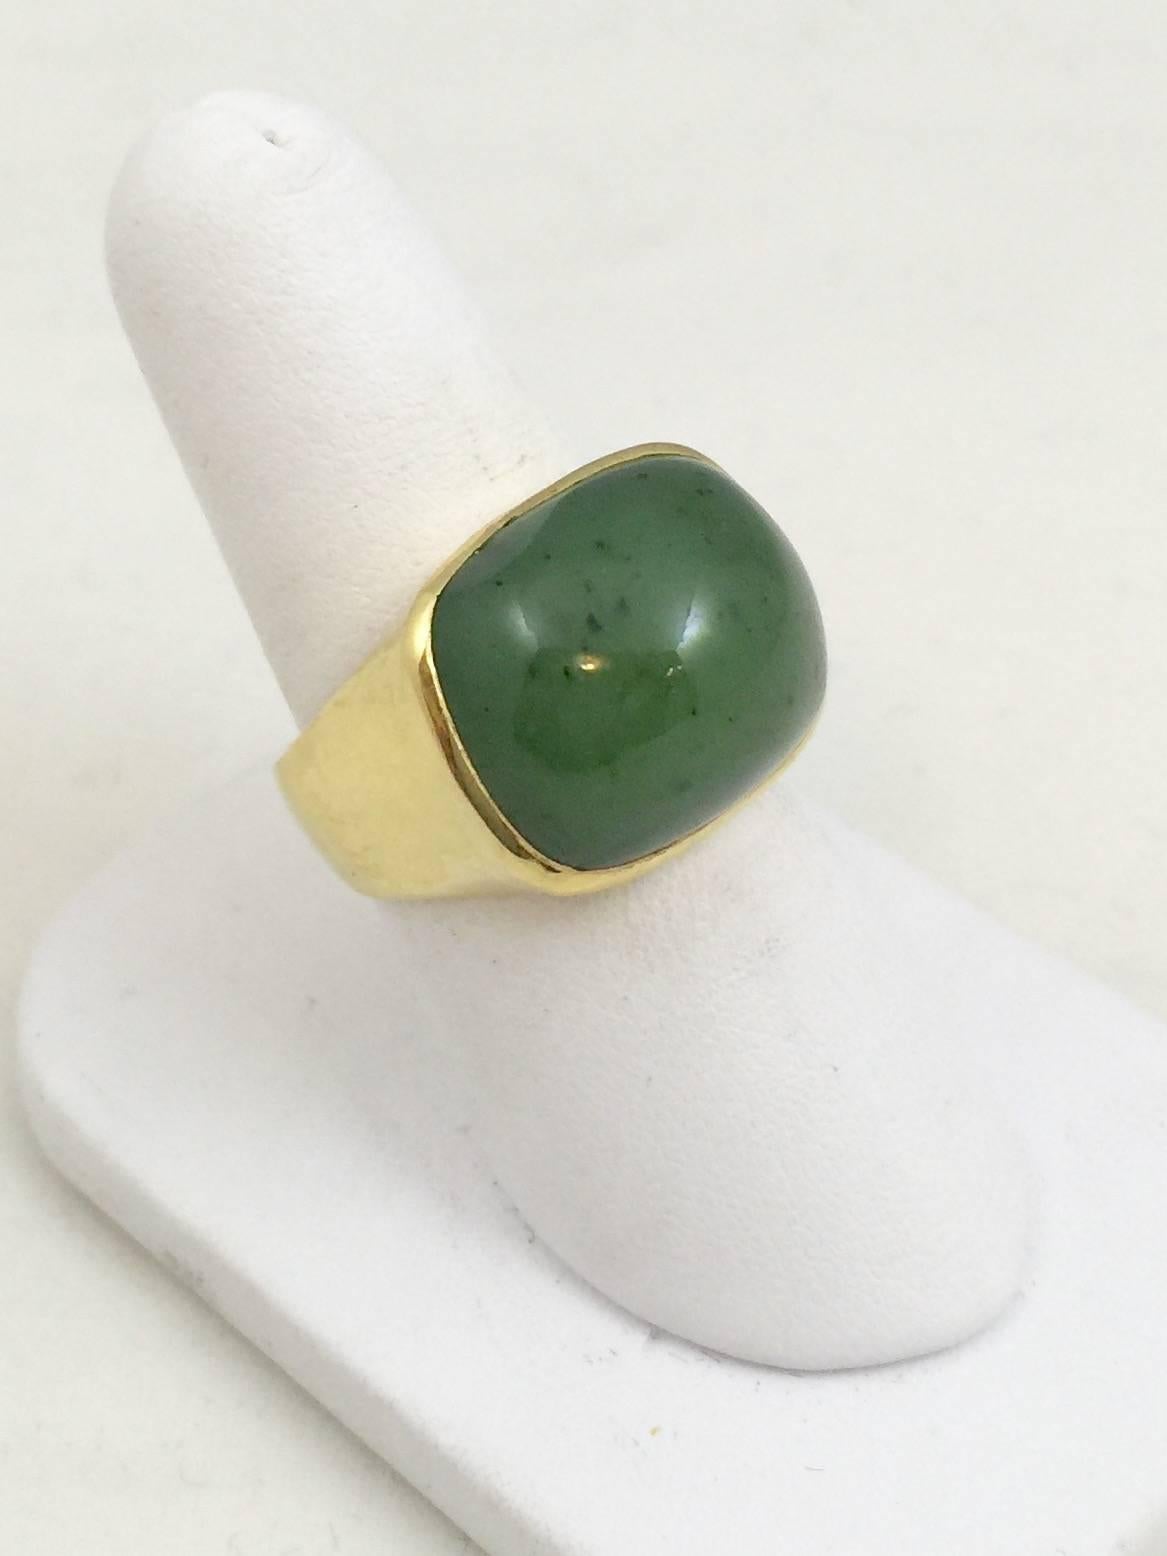 This 18 karat yellow gold ring can be worn by a man or a lady.  Clean, classic setting boasts a magnificent piece of green jade.  Setting has a hammered finish.  Shown in size 9 but can be sized up or down as needed.  Simply stated: a classic ring